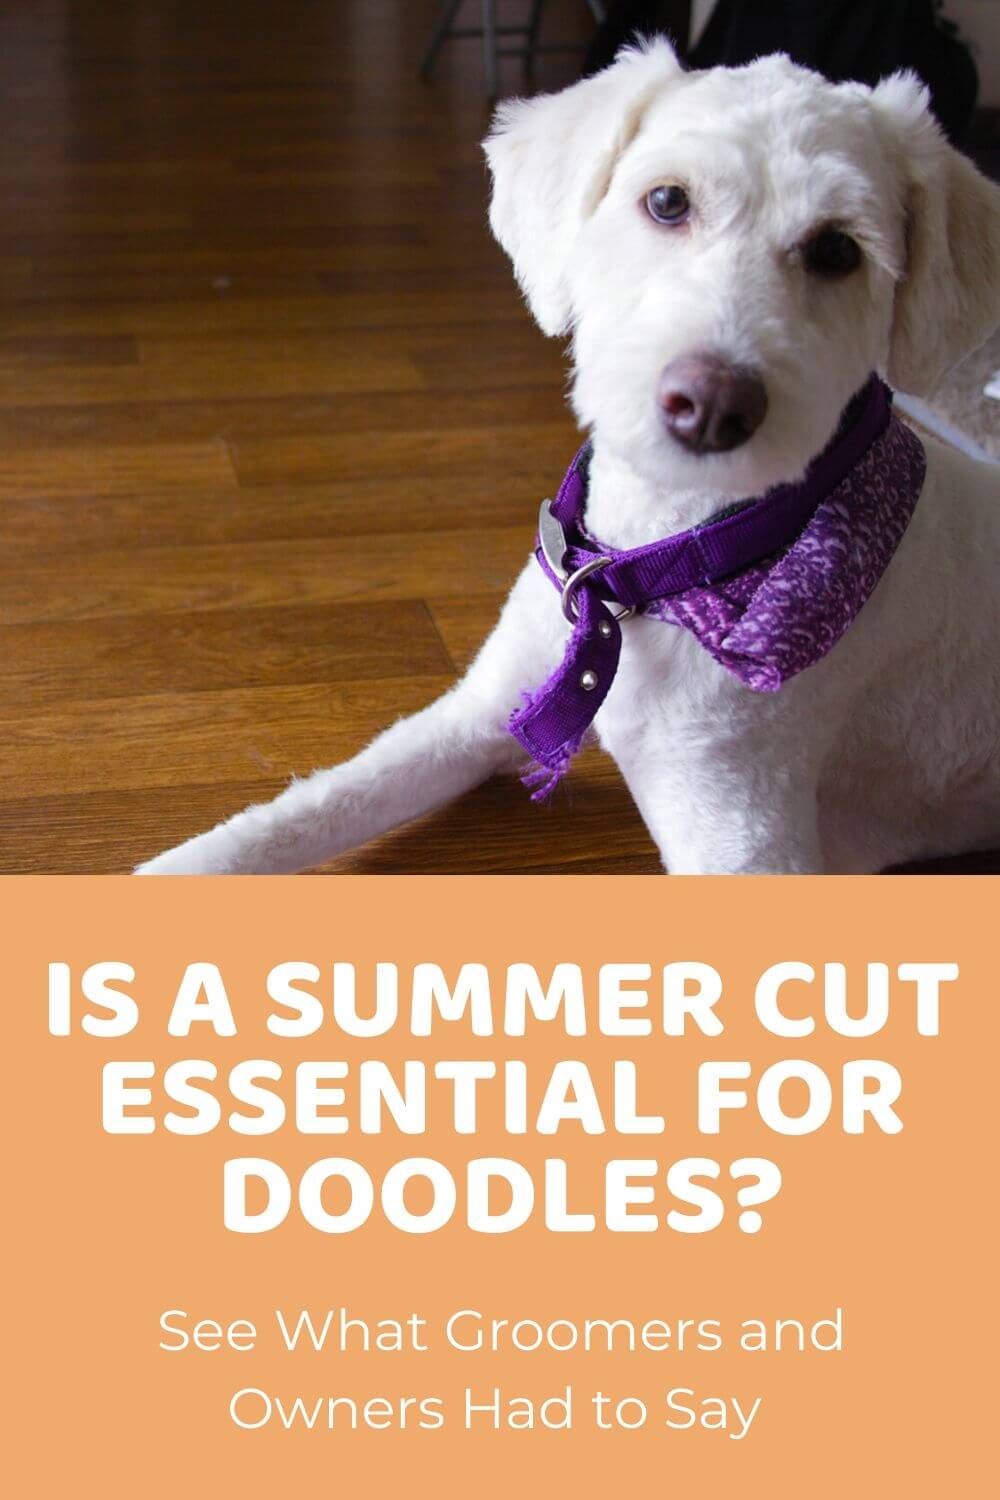 Is a Short Summer Cut Essential for Doodles